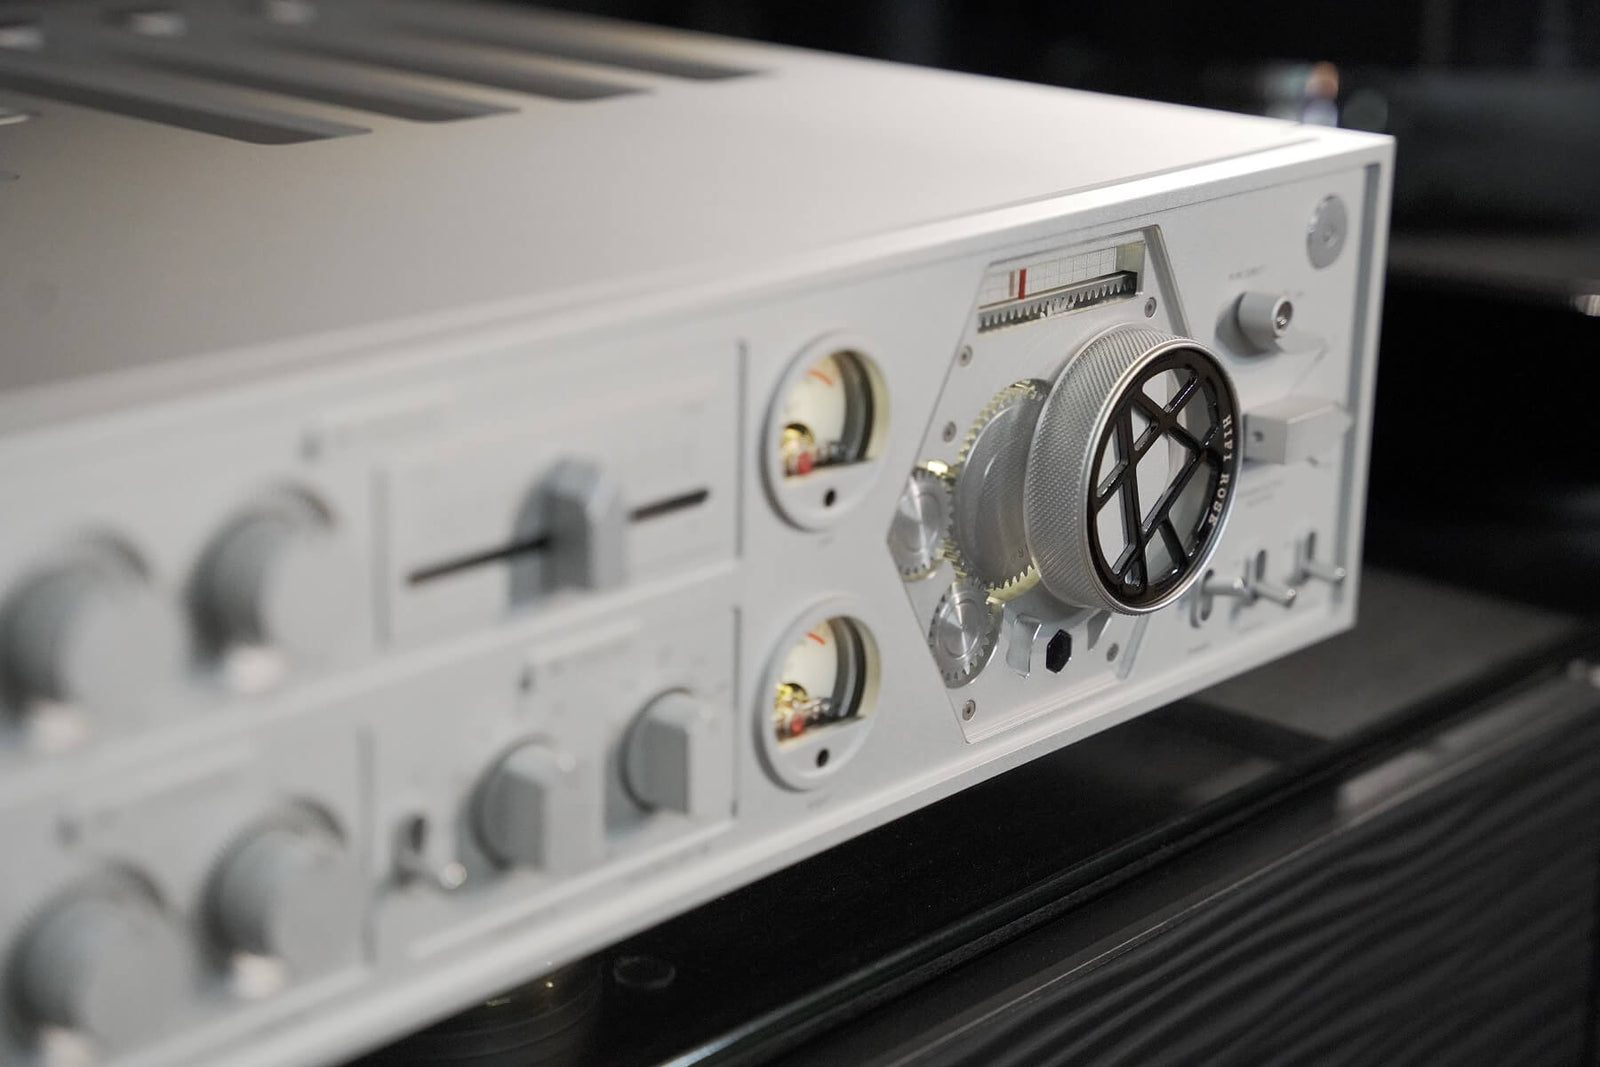 HIFIROSE RA180 REFERENCE INTEGRATED AMPLIFIER - HiFiRose is a HiFi Media Player brand that offers media player: Integrated Amplifier, Network Streamer, CD Drive... Get the best deal at vinylsound.ca for HiFiRose Integrated Amplifier, HiFiRose Network Streamer, HiFiRose CD Drive...